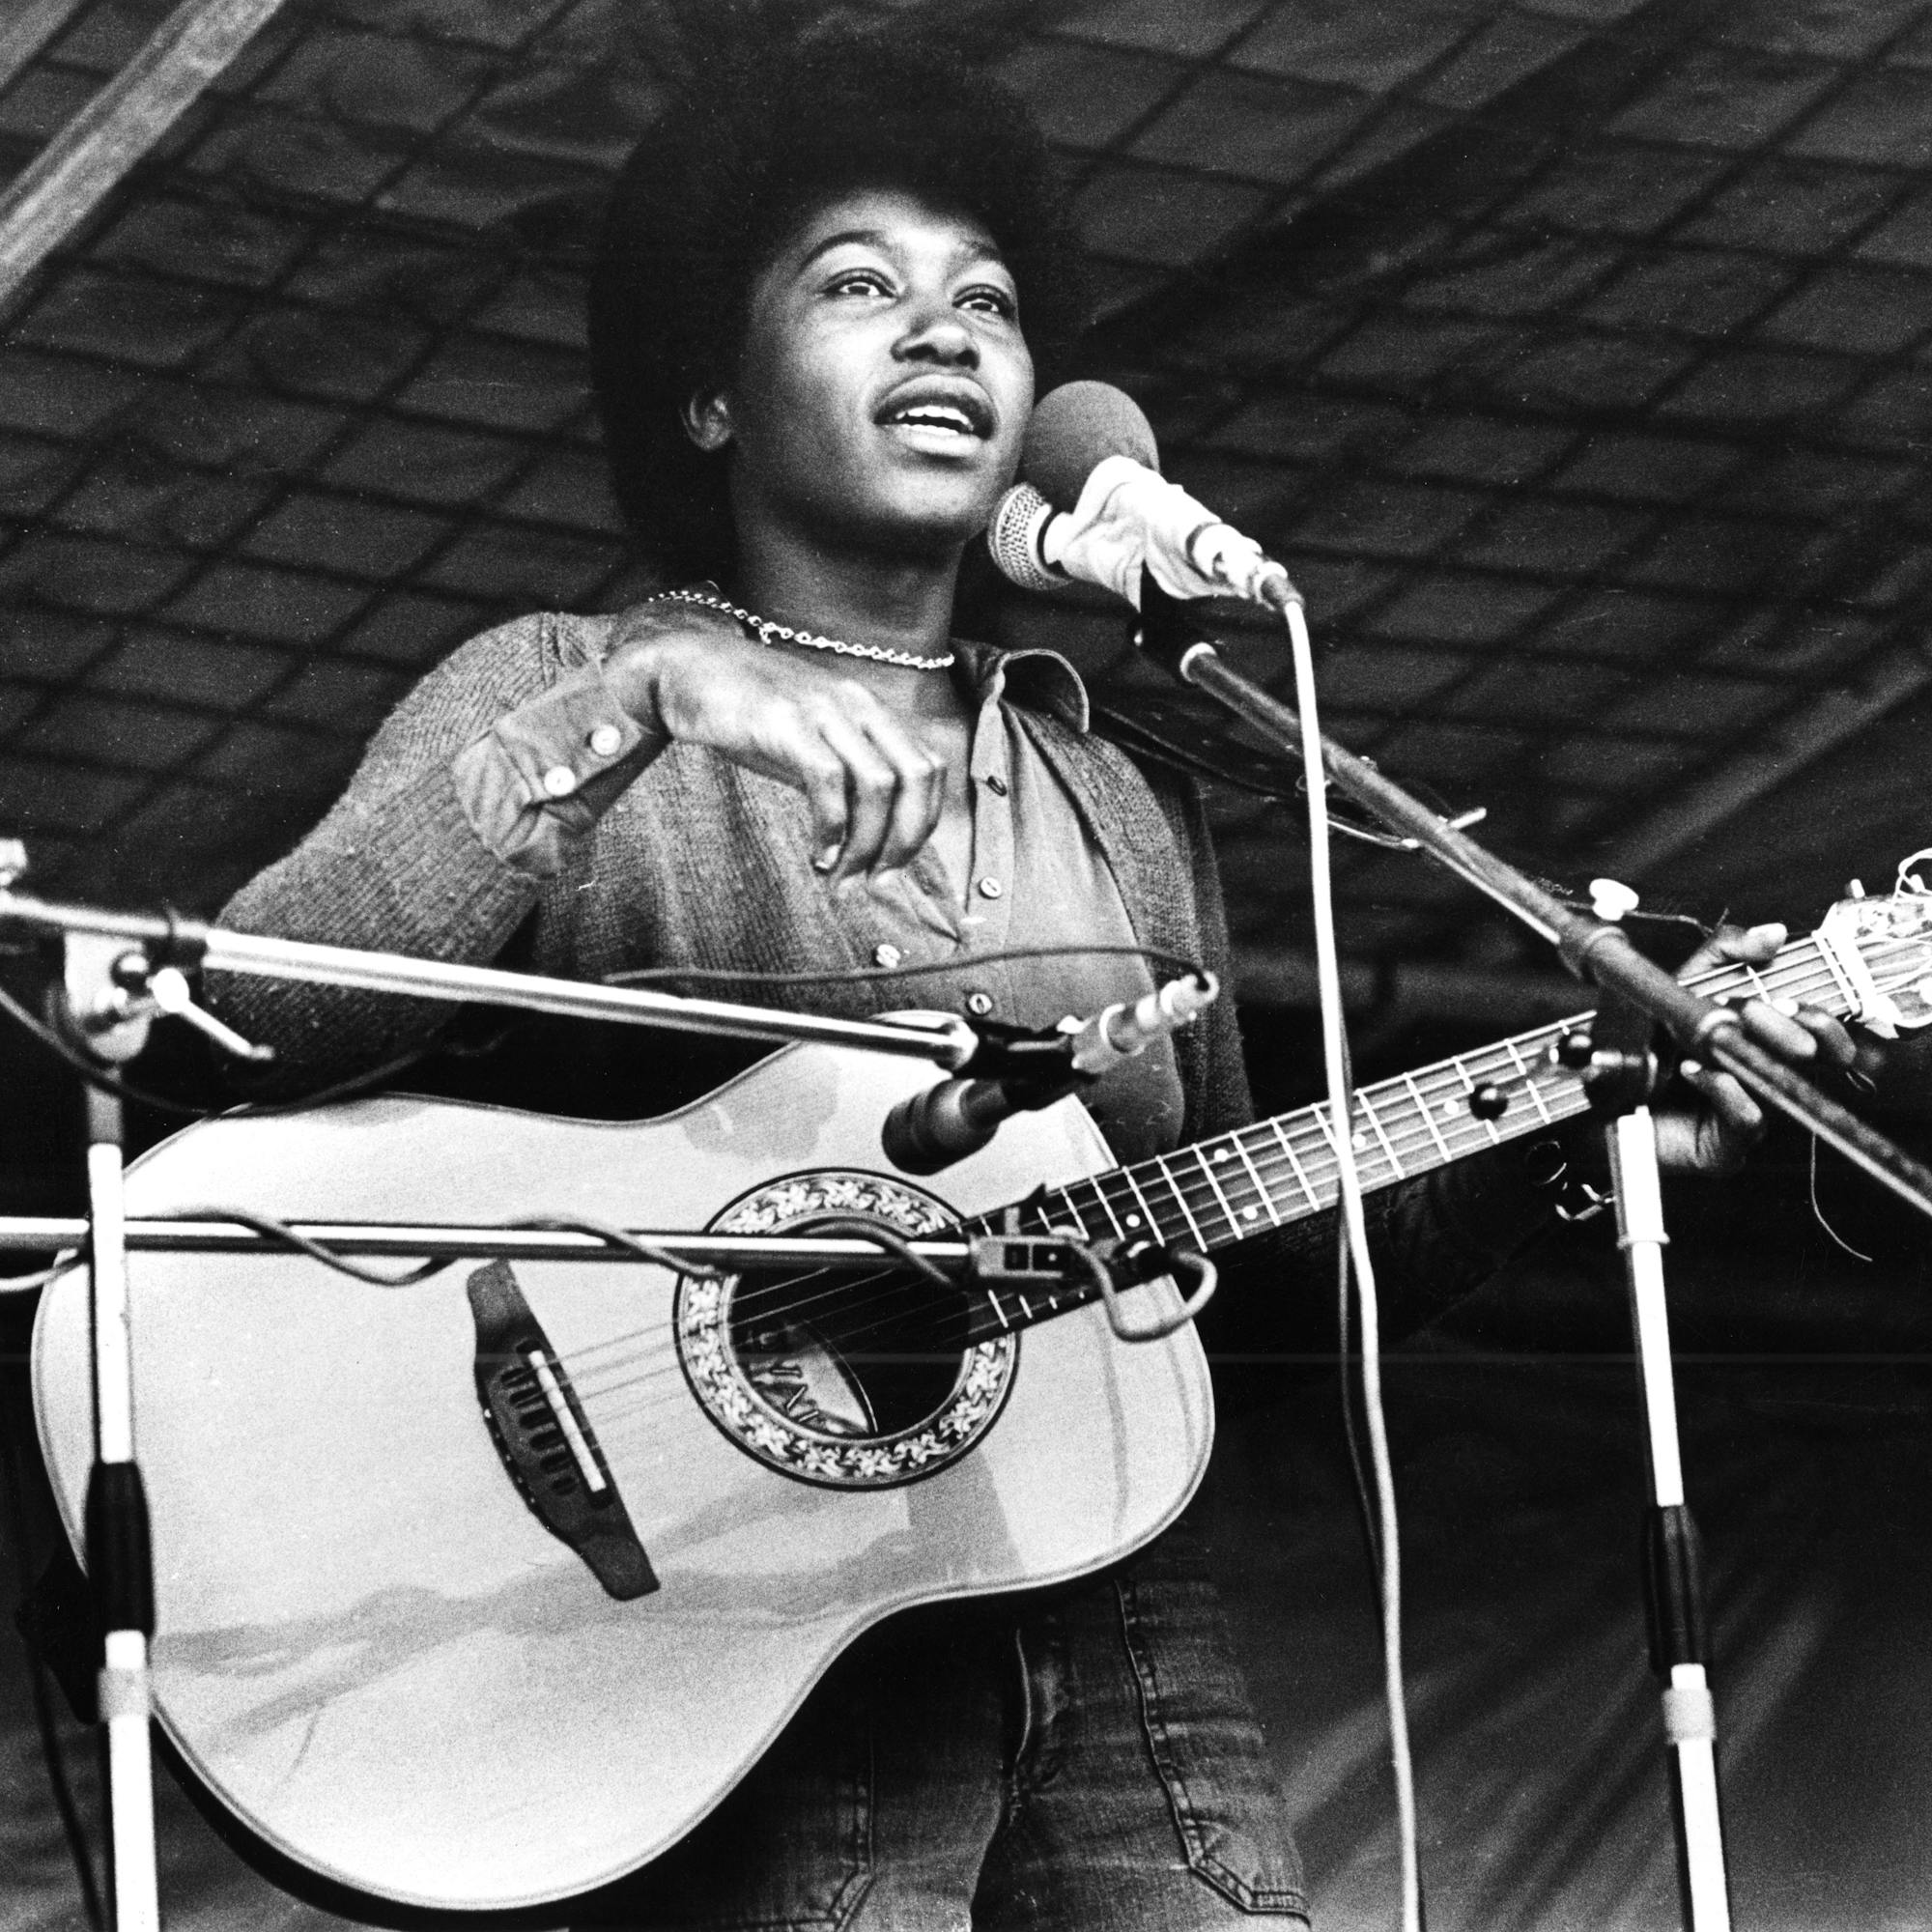 Joan Armatrading plays guitar in this black-and-white photo.